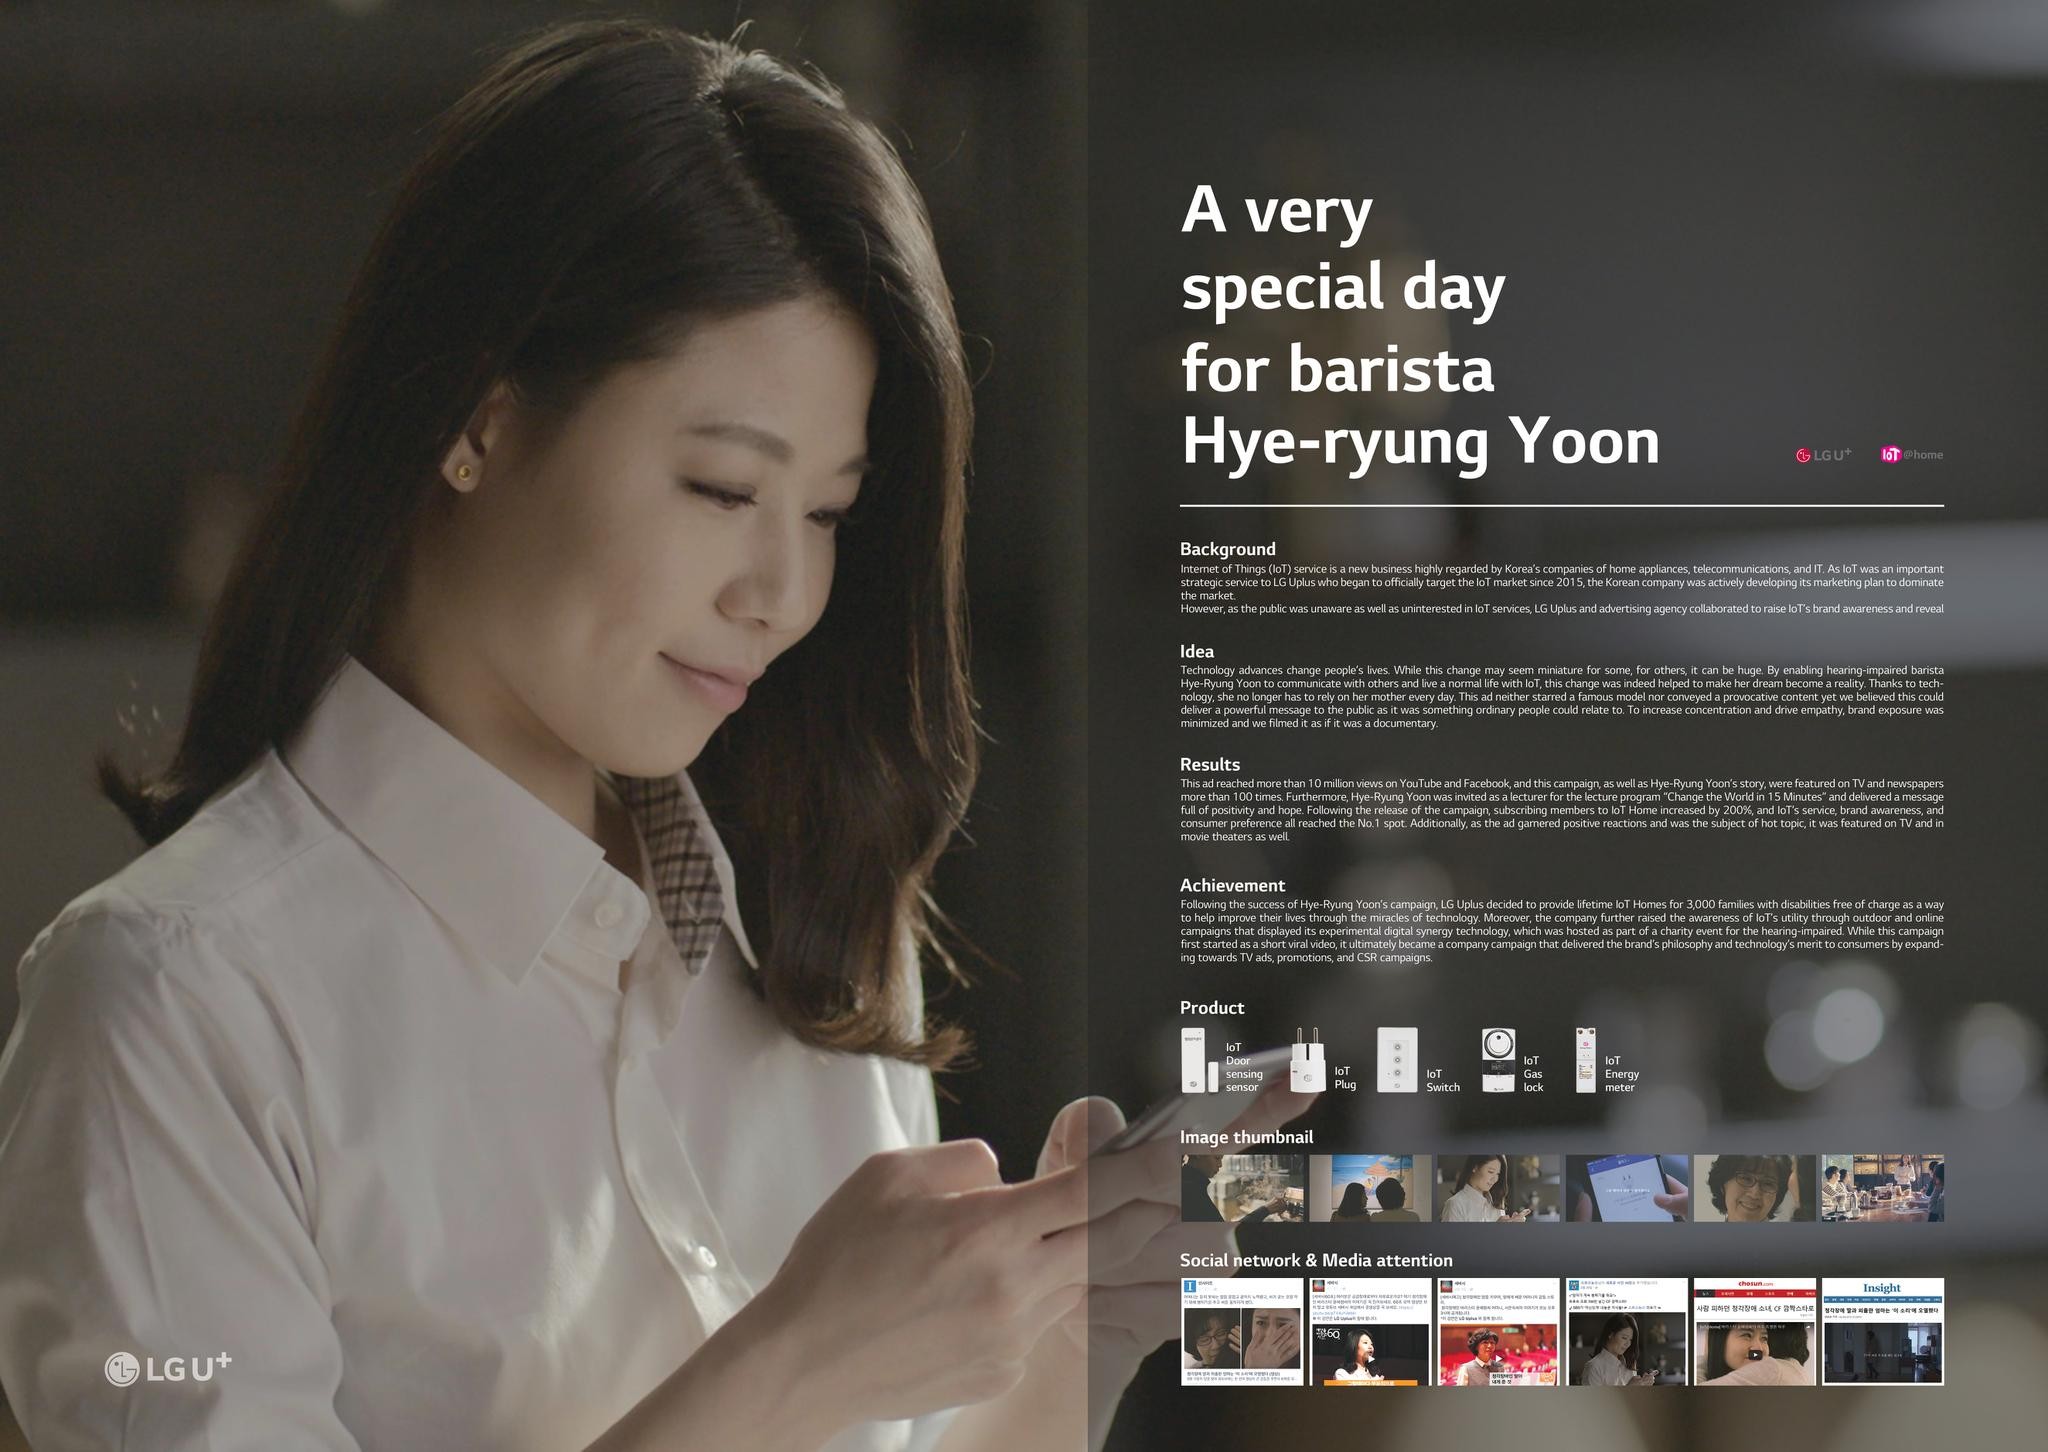 A Very special day for barista Hye-ryung Yoon